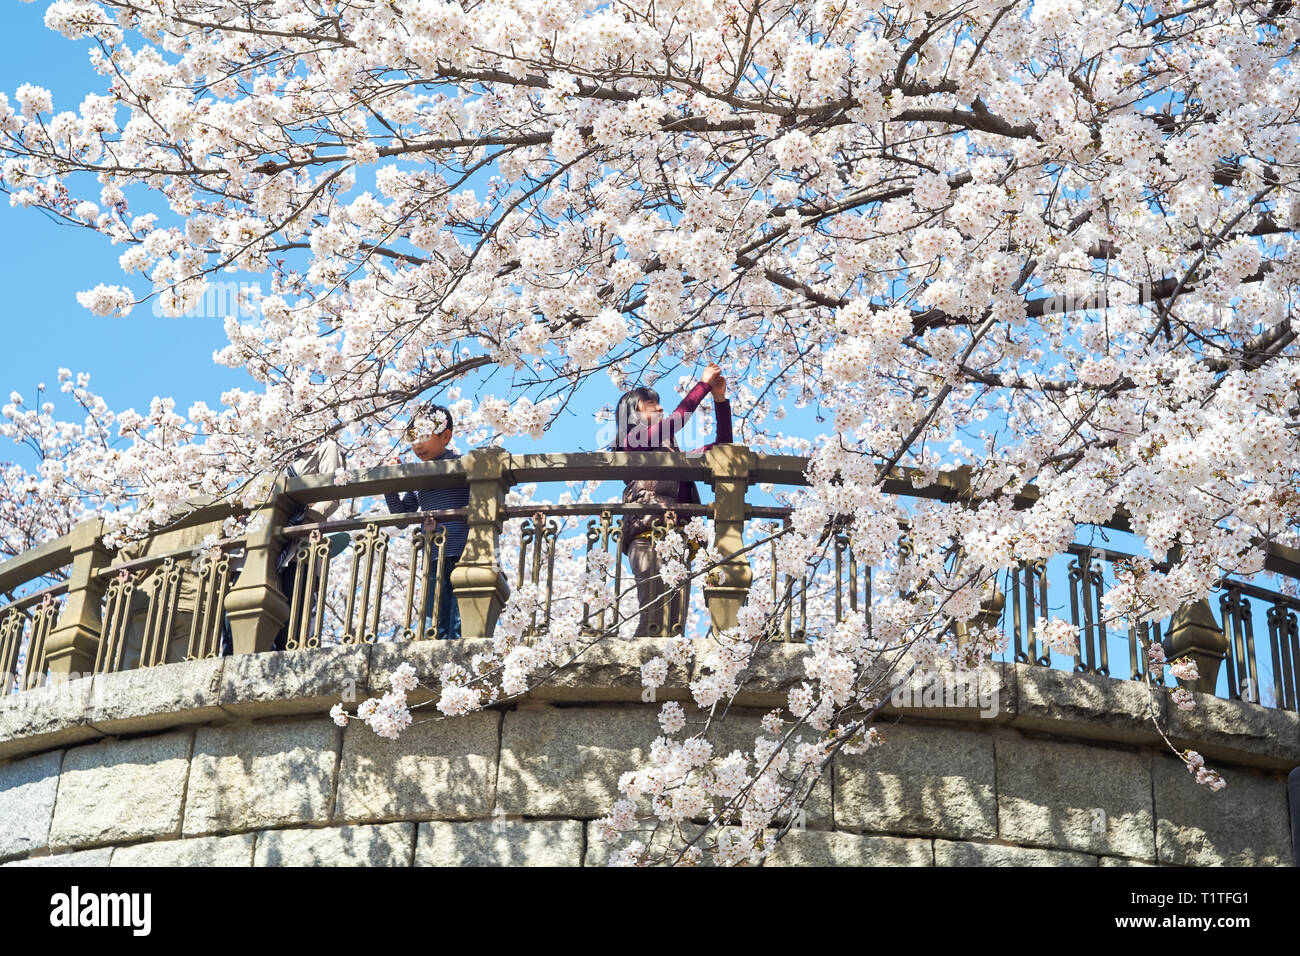 People at a park admiring blooming sakura cherry blossom trees. Spring in Japan. Stock Photo